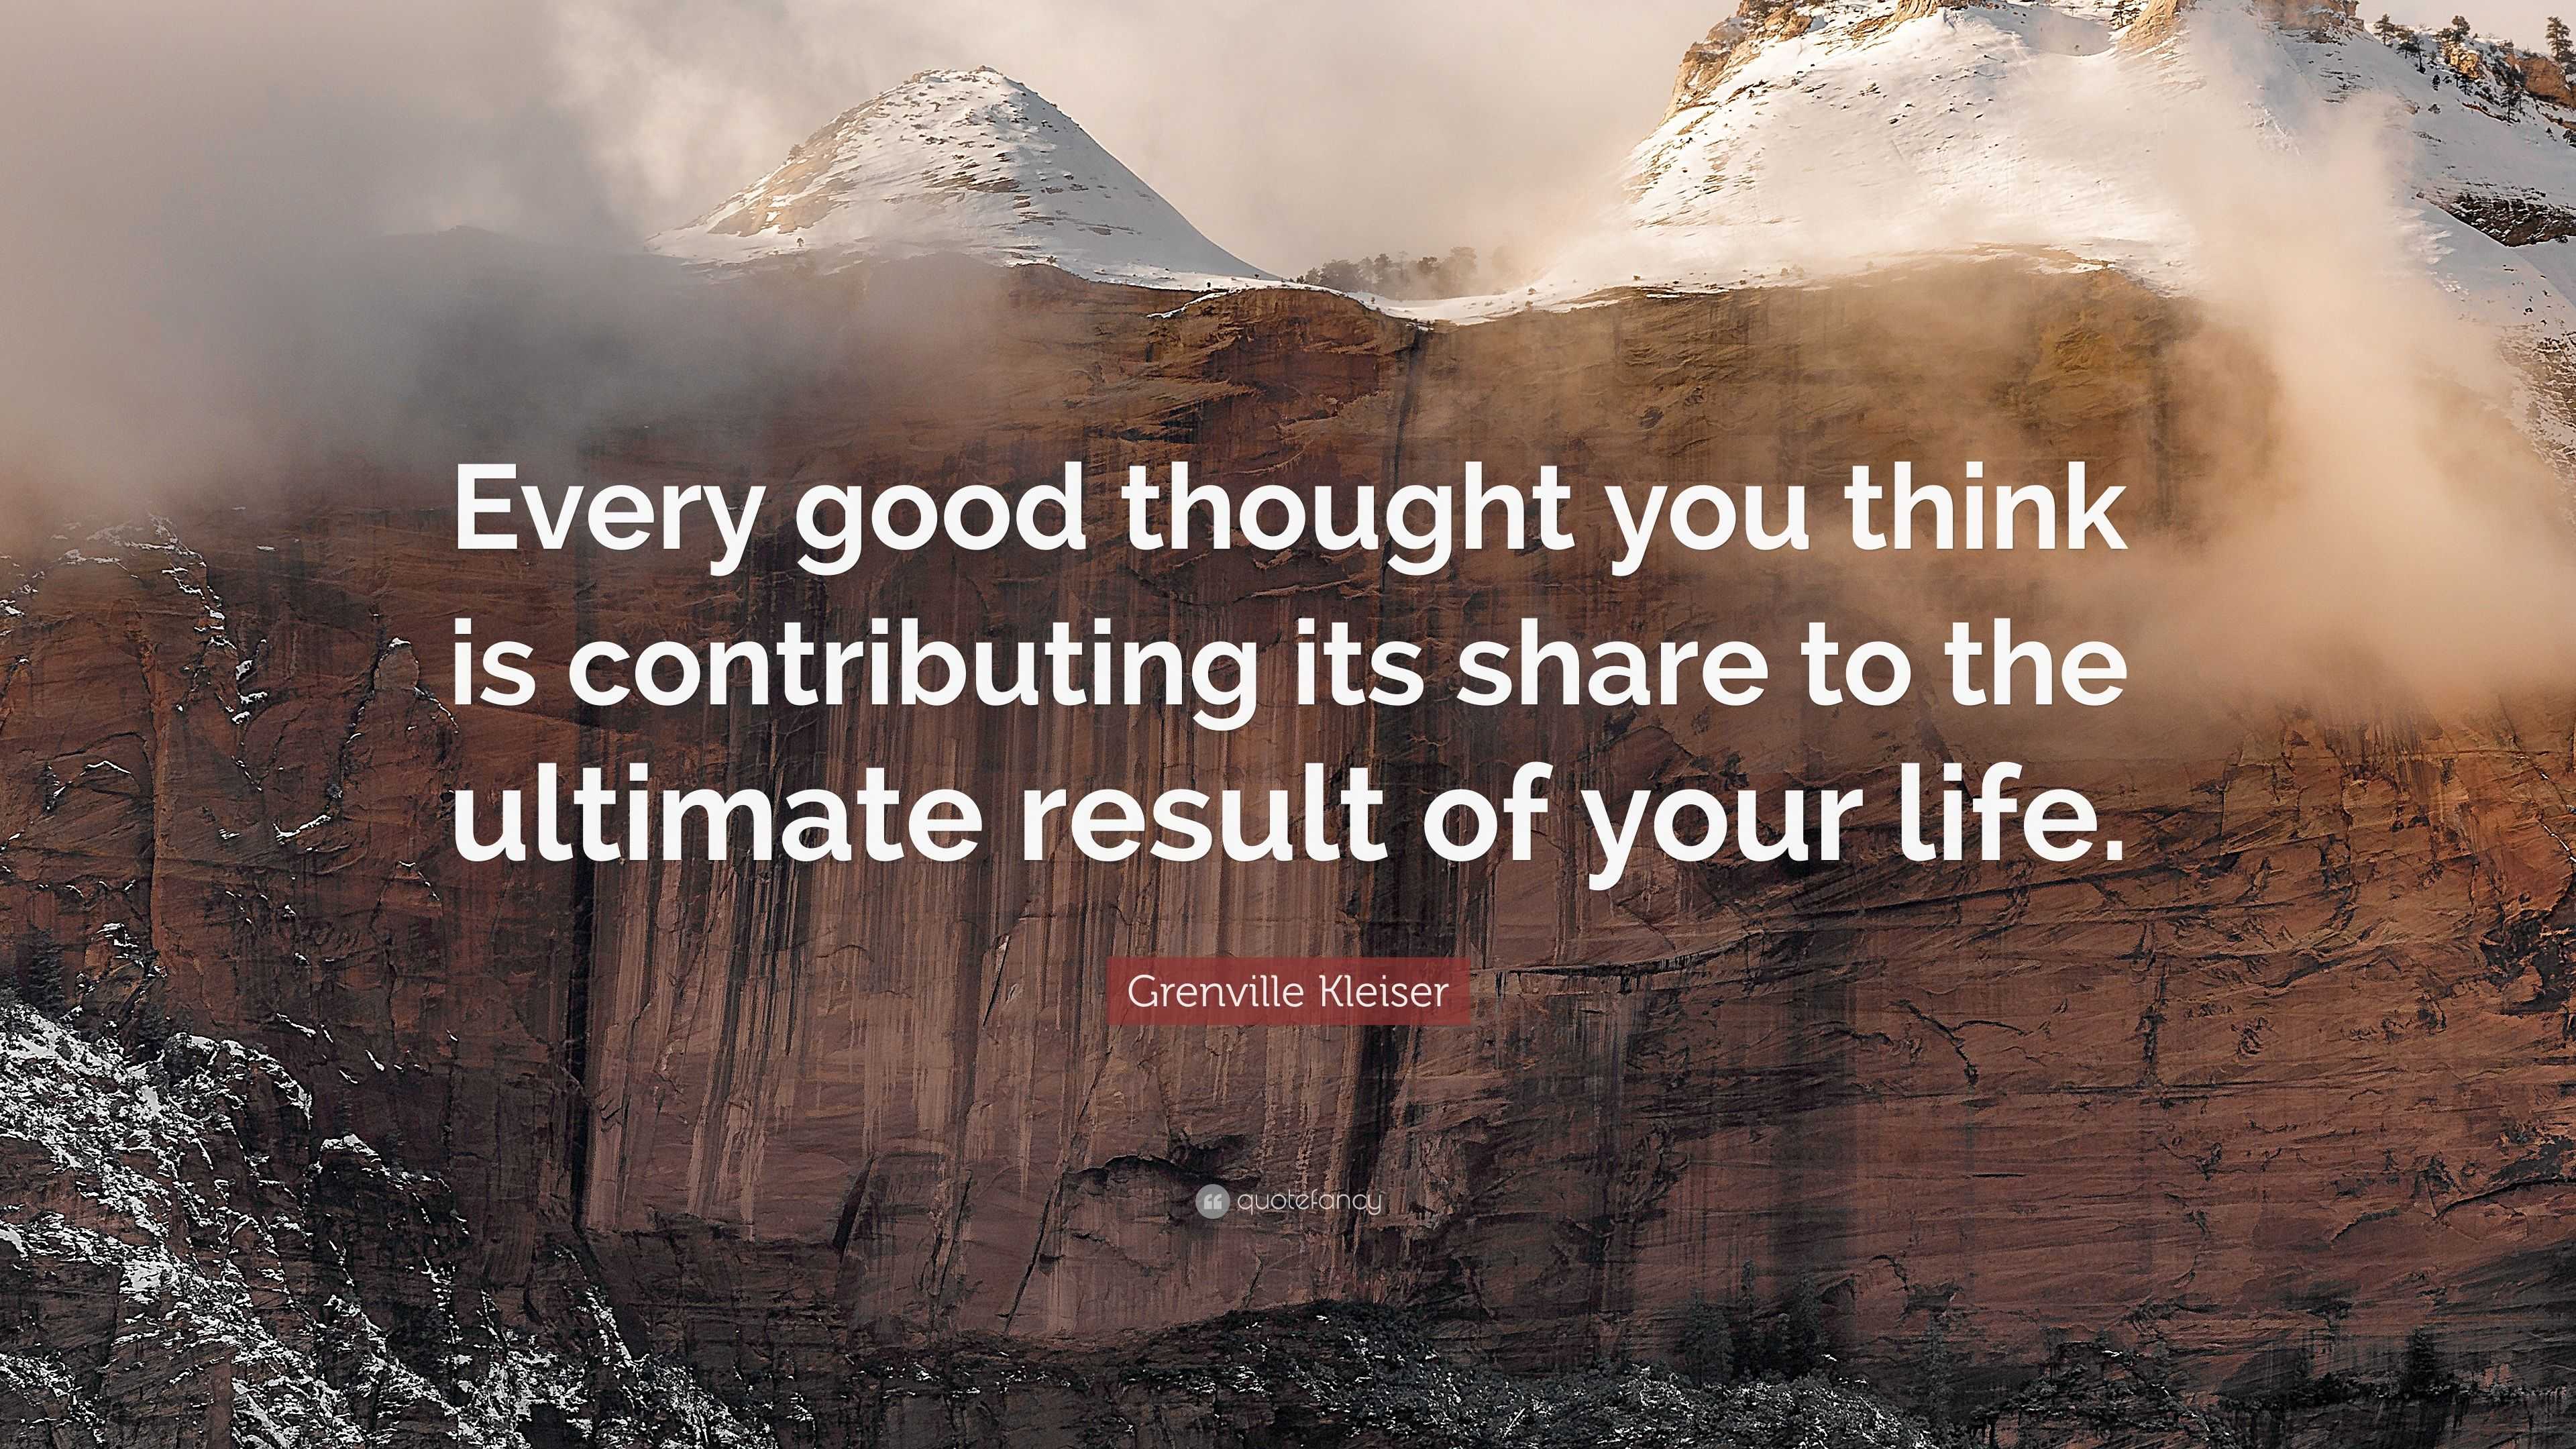 Grenville Kleiser Quote: “Every good thought you think is contributing its  share to the ultimate result